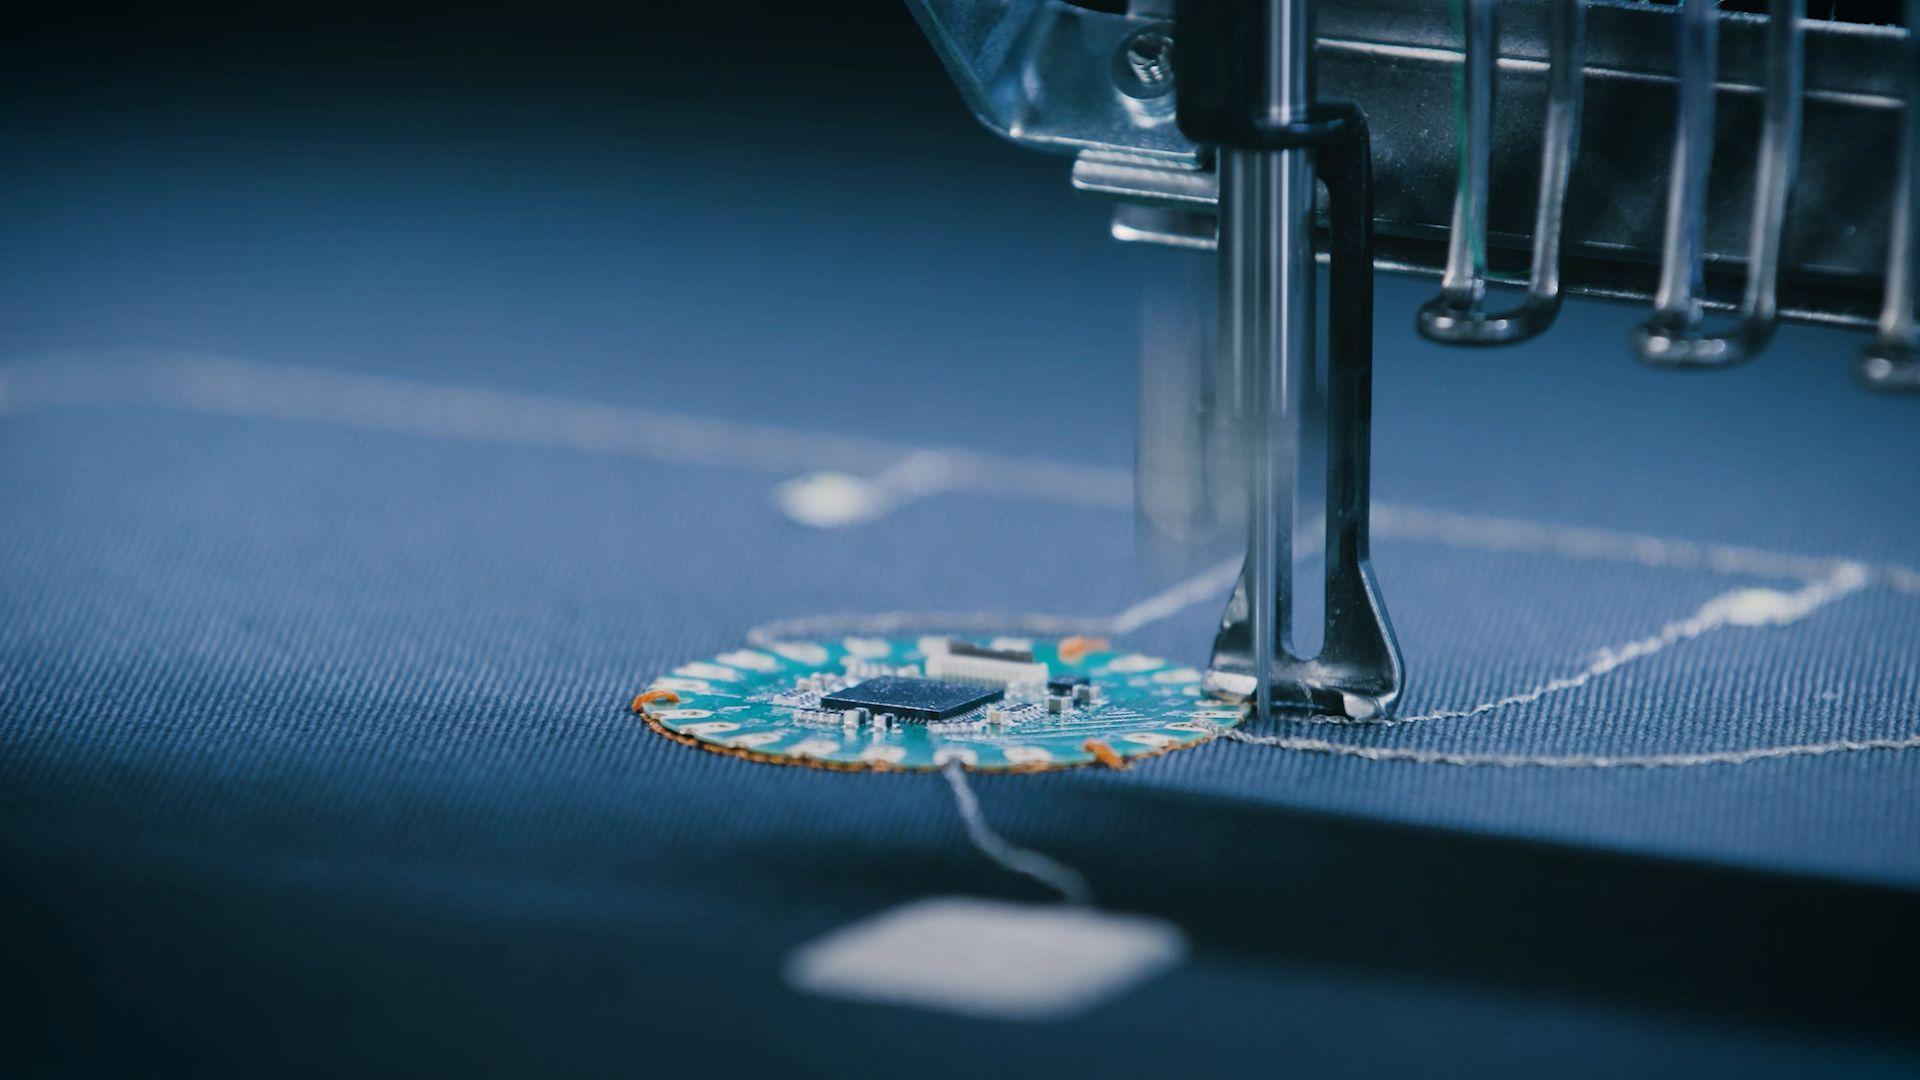 Product: Workshop 3: Introduction to Microcontrollers and PCB Integration into Textiles